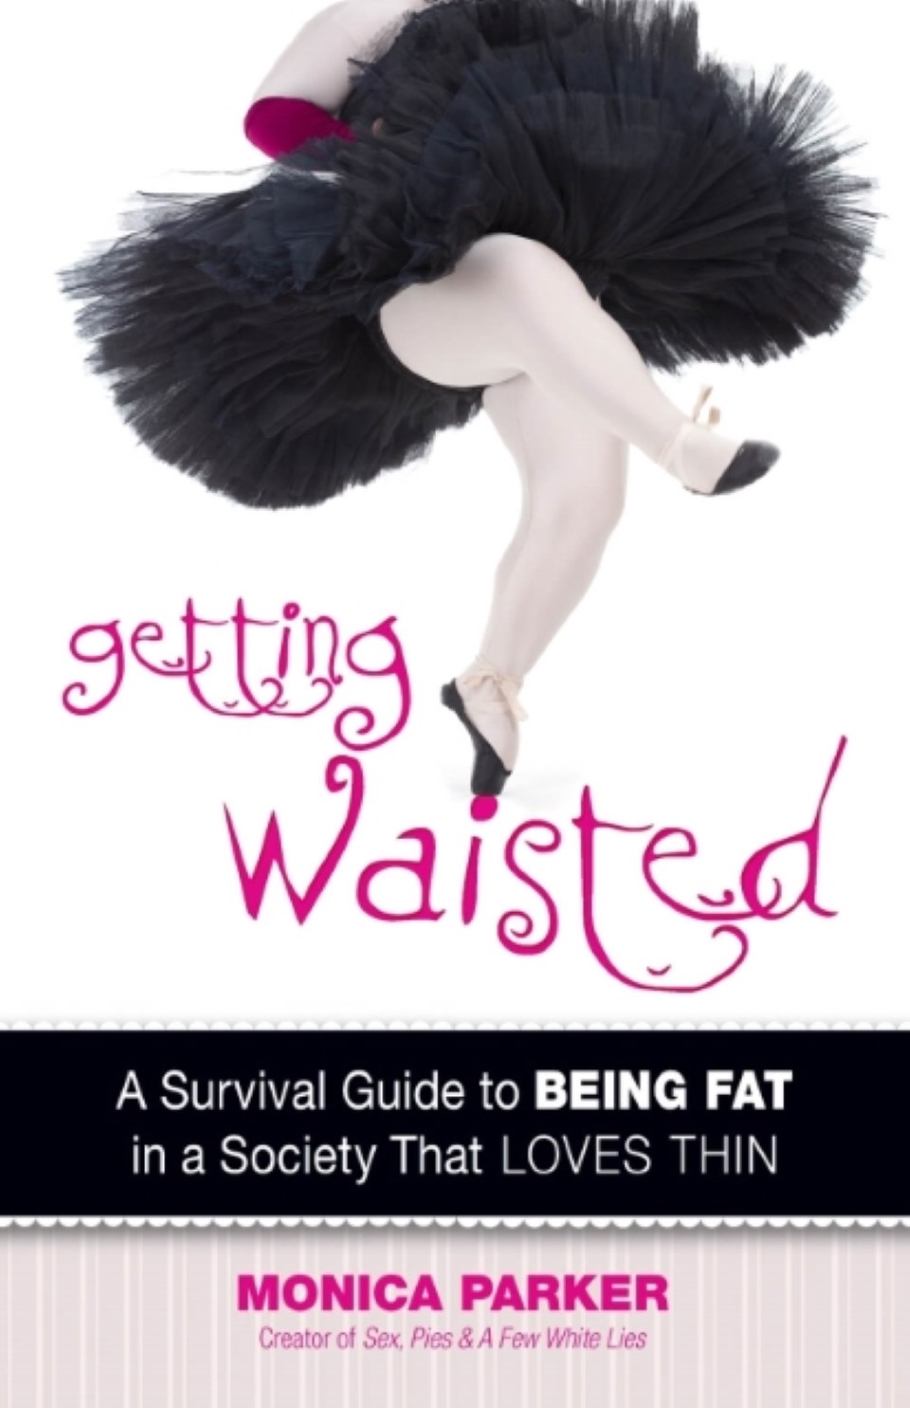 Book cover of Getting Waisted: A Survival Guide to Being Fat in a Society That Loves Thin written by Monica Parker.